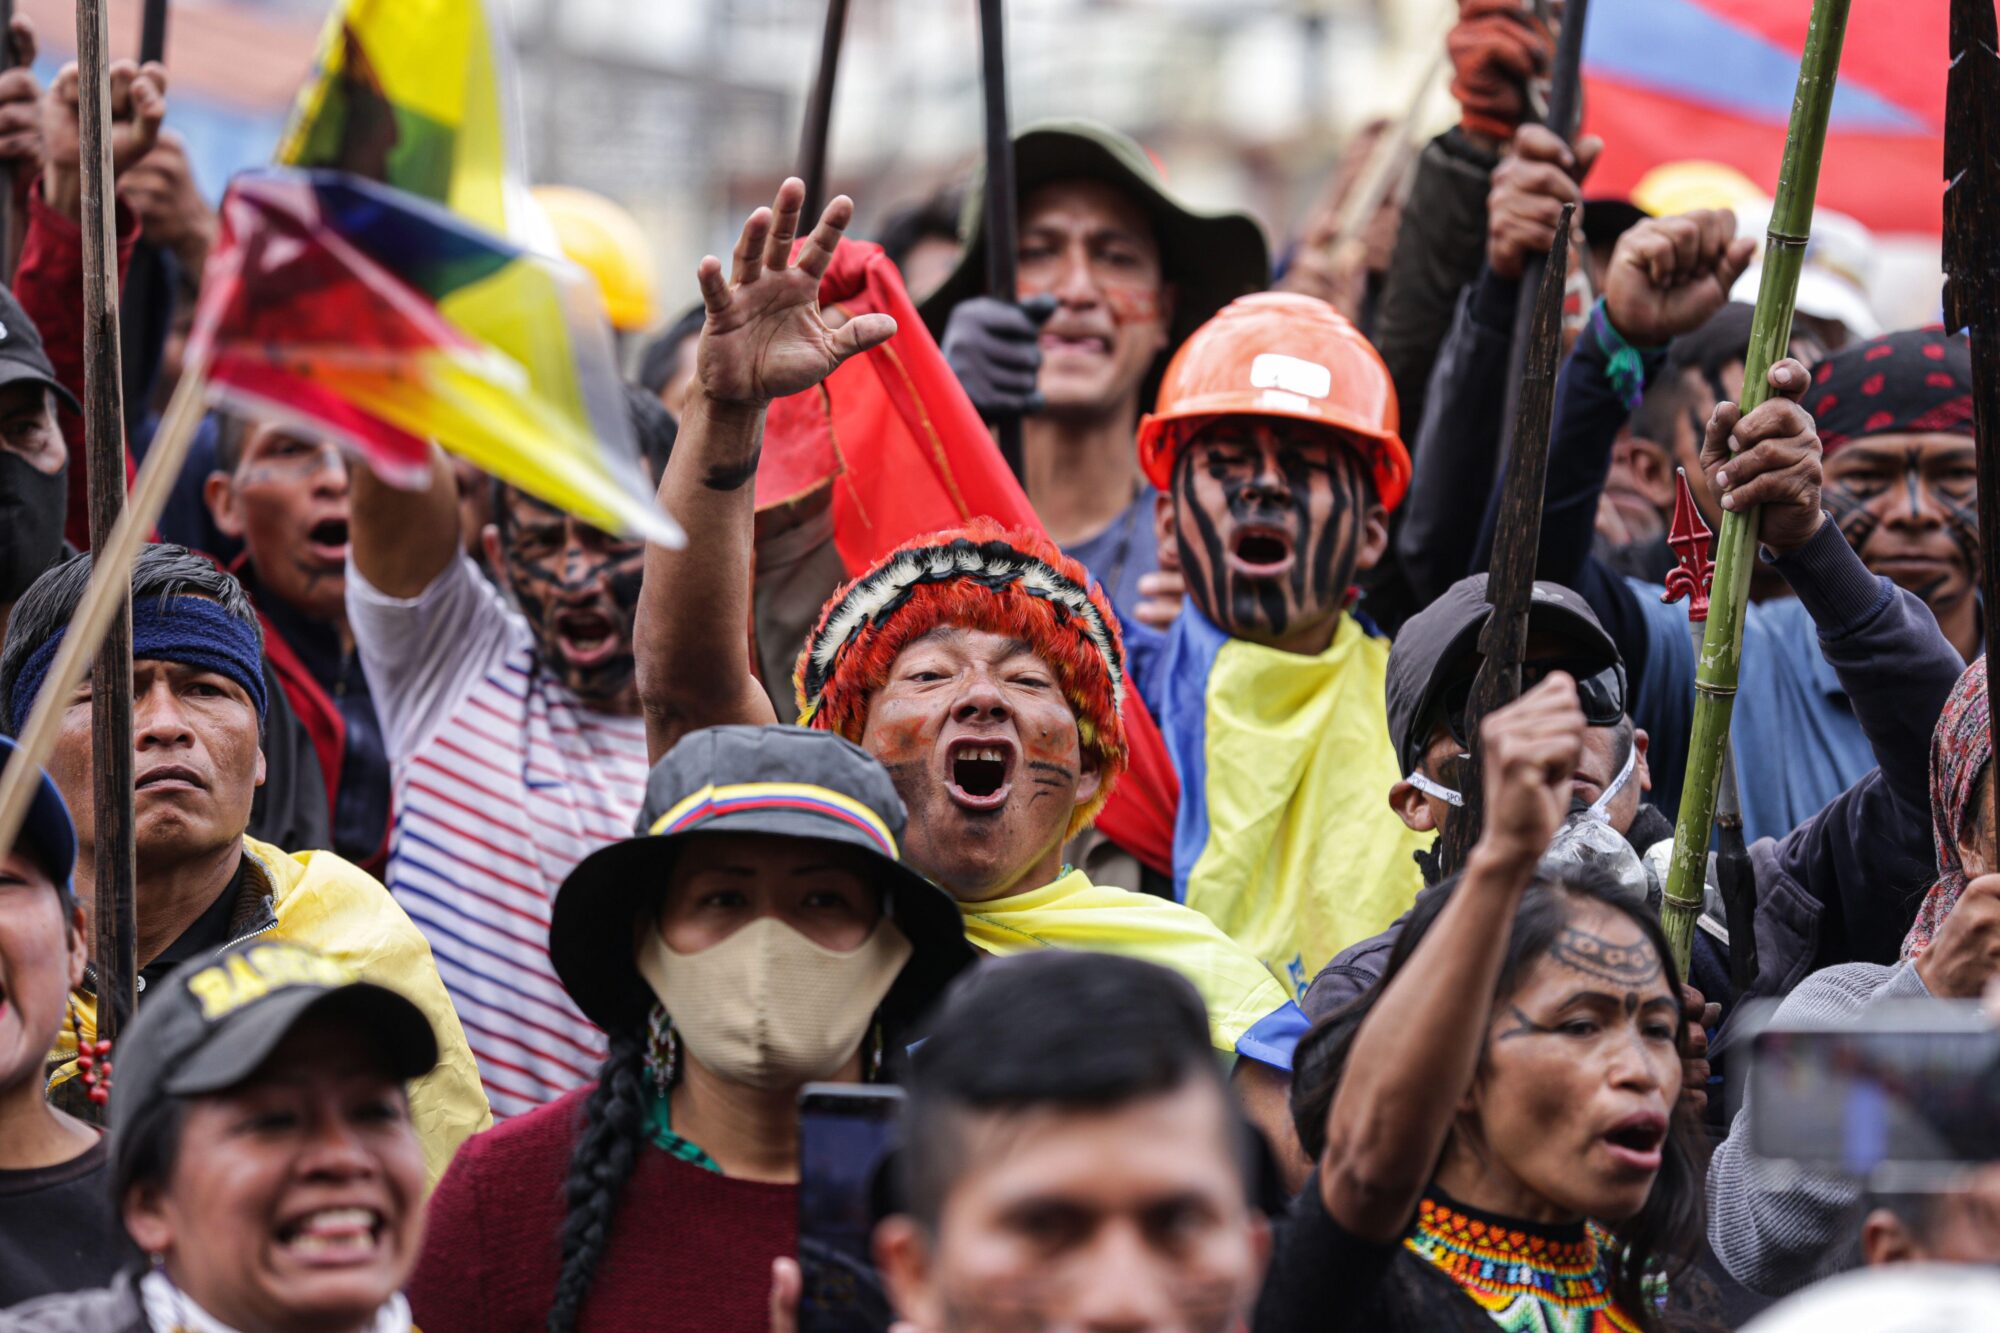 <p>Indigenous protestors in Quito, Ecuador in June. The country saw weeks of demonstrations against rising fuel and food prices, indigenous exclusion and the government’s extractive policies (Image: Joaquin Montenegro Humanante / dpa / Alamy)</p>